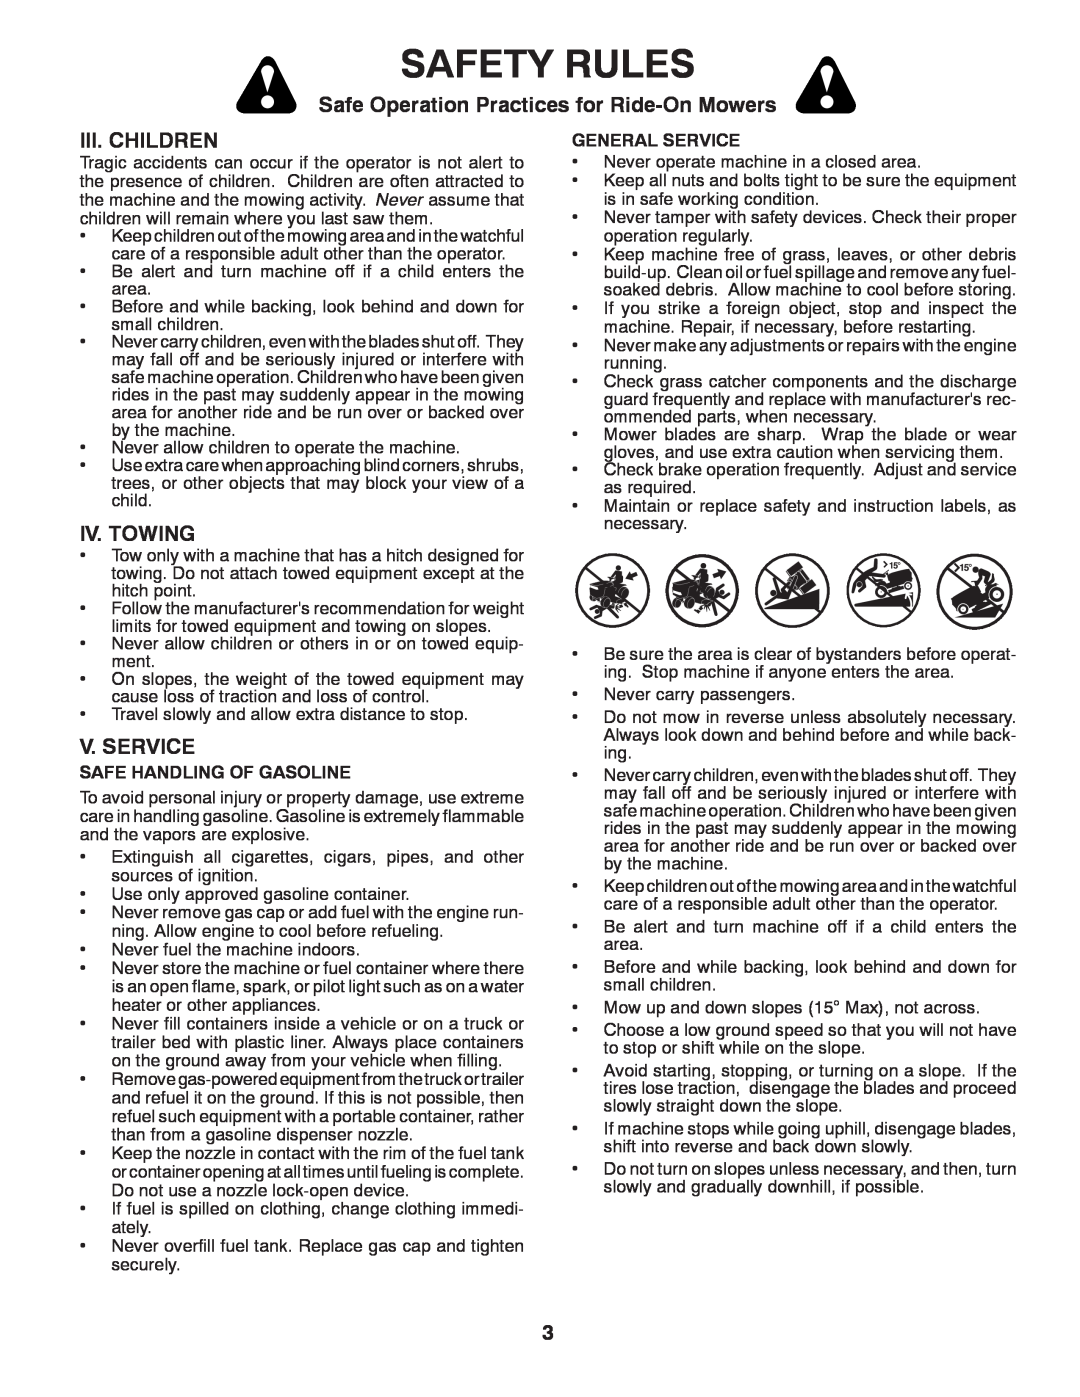 Poulan 96012006904 manual Iii. Children, Iv. Towing, V. Service, Safety Rules, Safe Operation Practices for Ride-On Mowers 